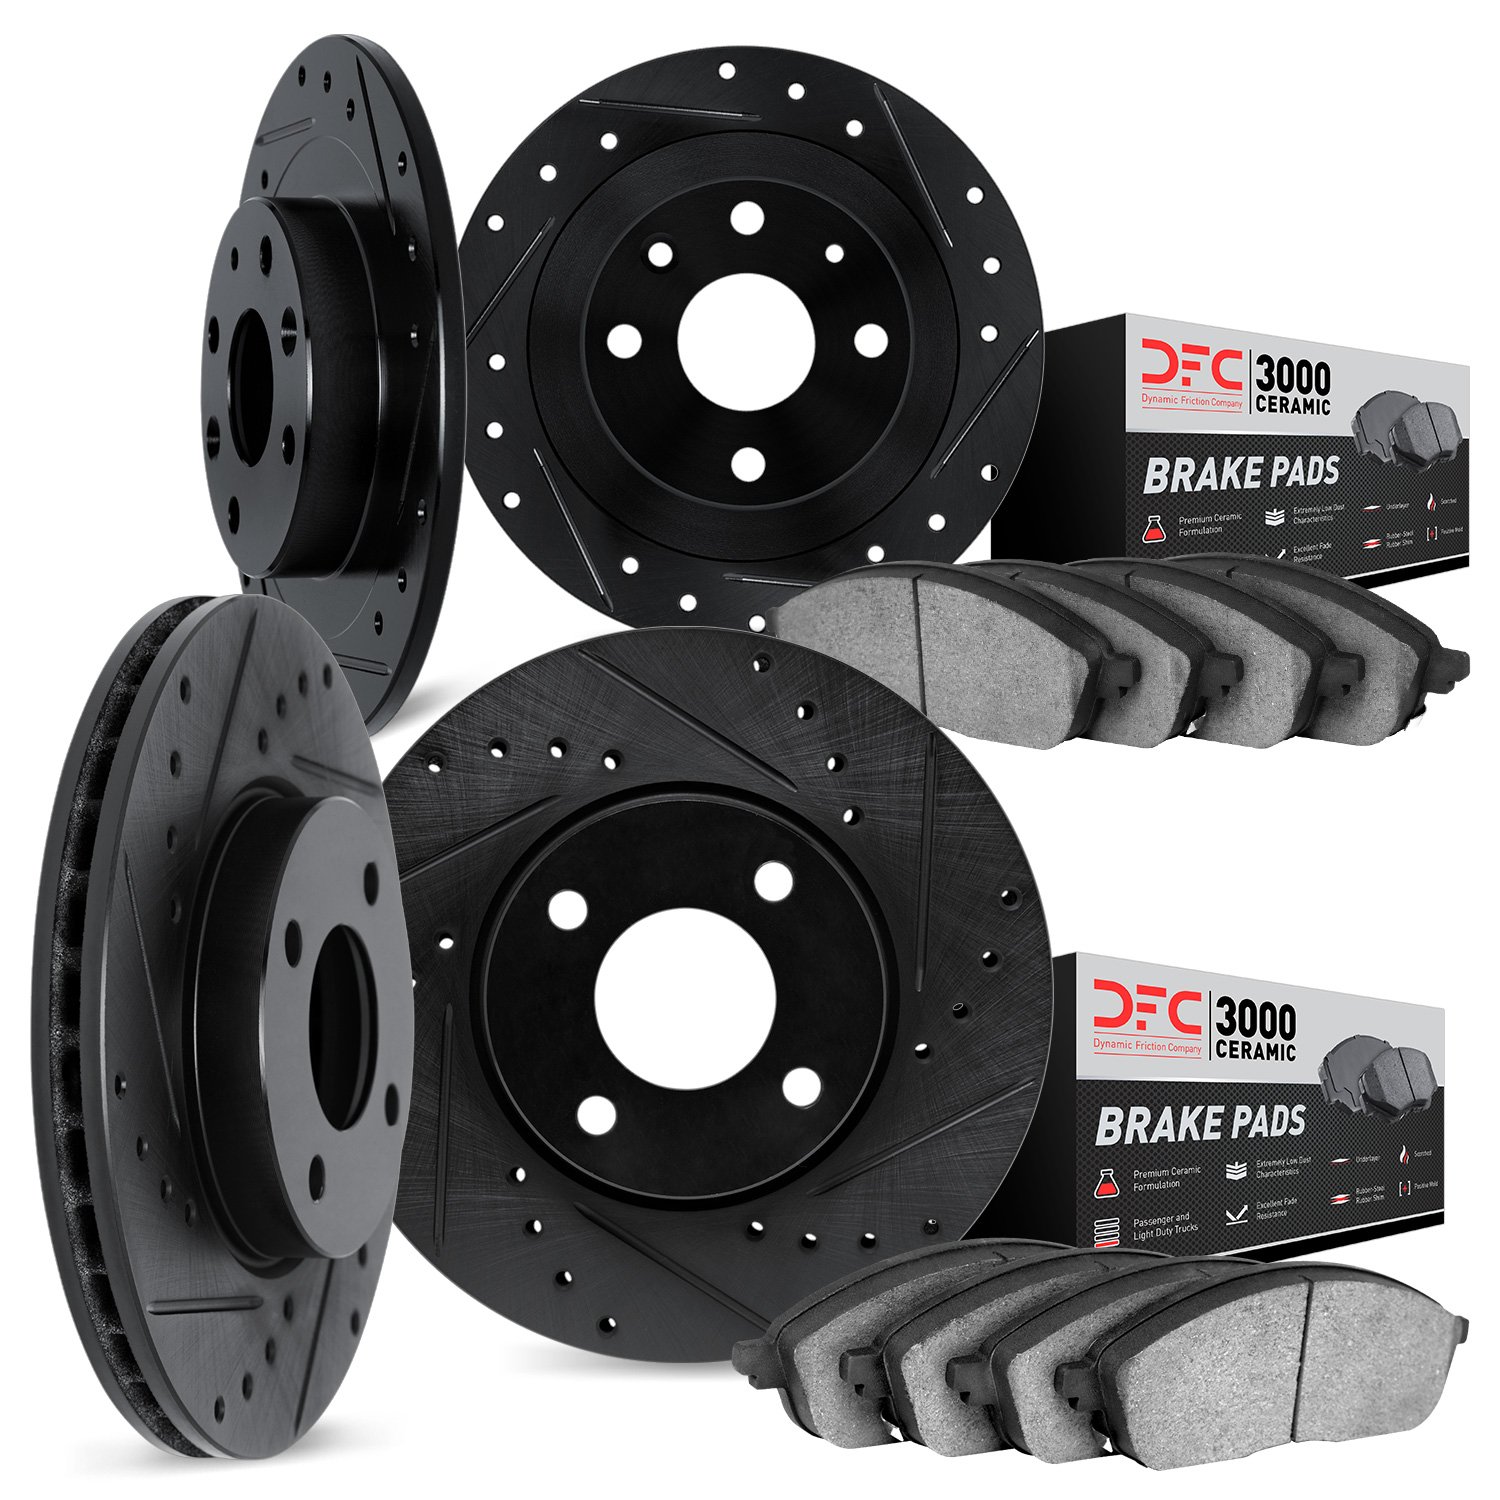 8304-59003 Drilled/Slotted Brake Rotors with 3000-Series Ceramic Brake Pads Kit [Black], 1992-1997 Acura/Honda, Position: Front